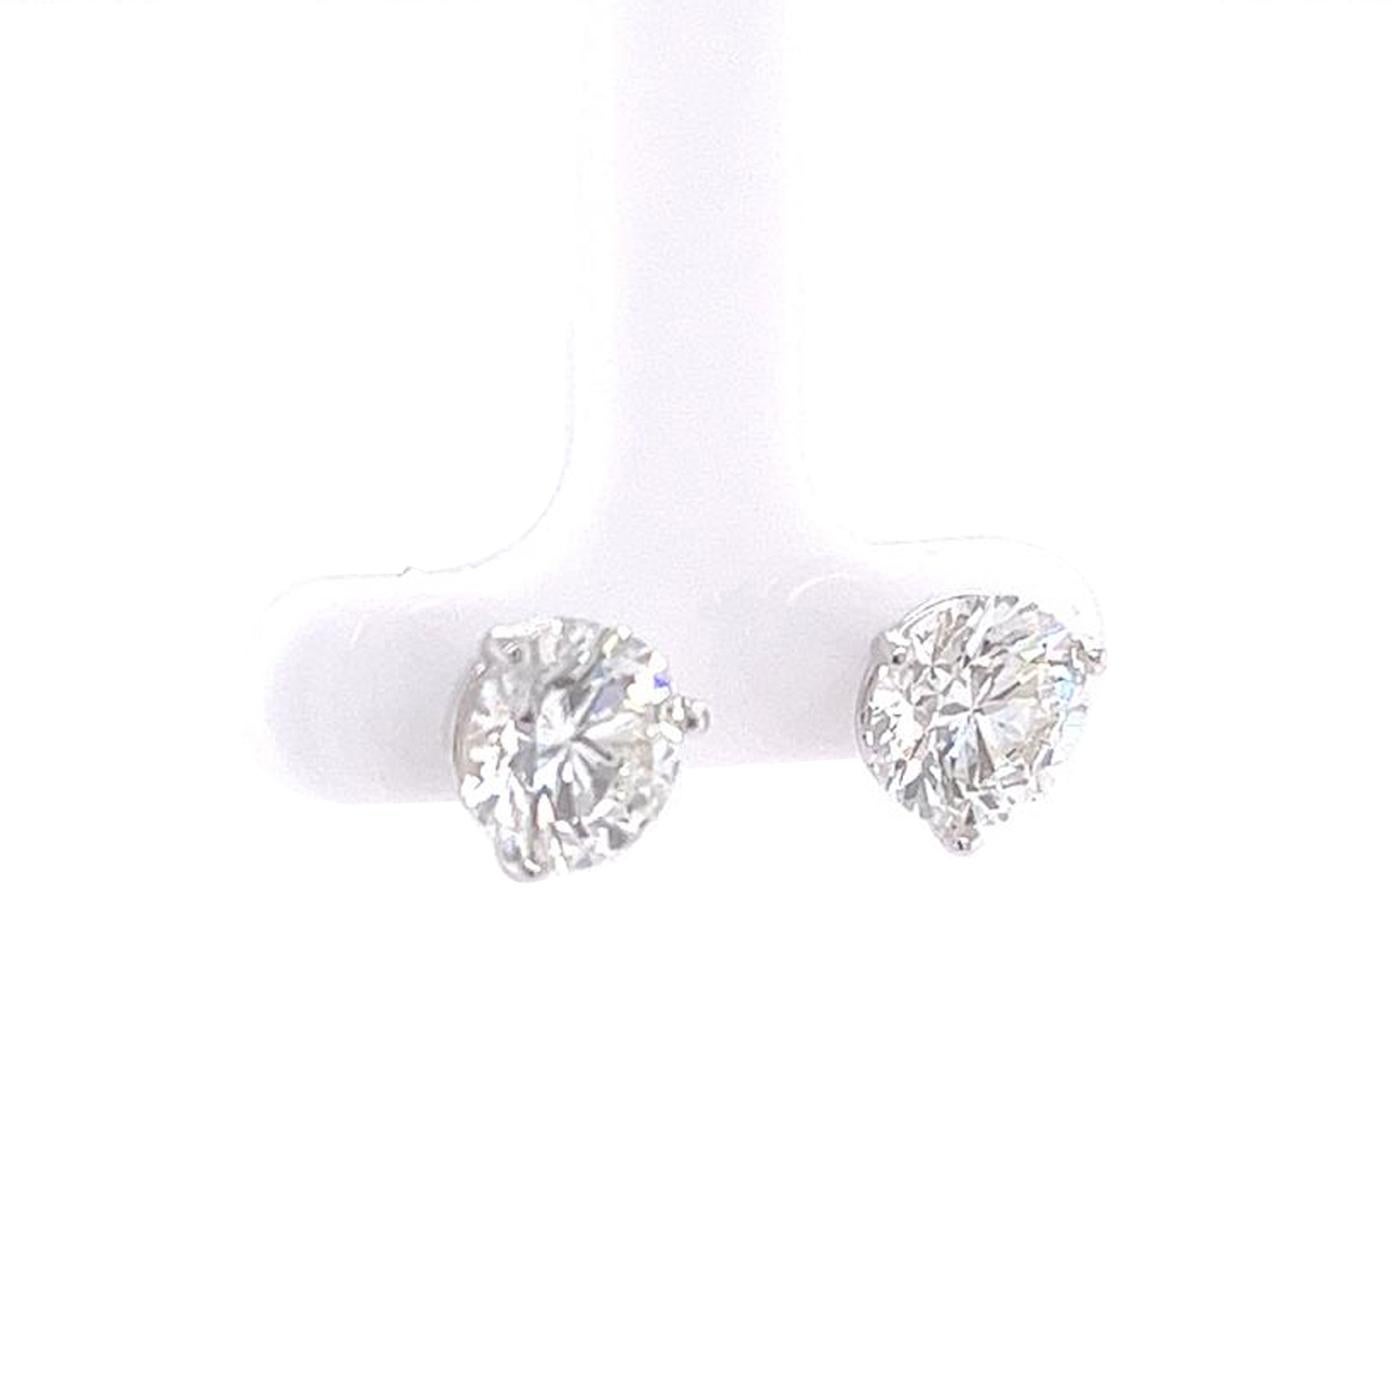 5.19ct Round Natural Diamonds Martini Setting 3 Prong Studs Earrings In Good Condition For Sale In Aventura, FL